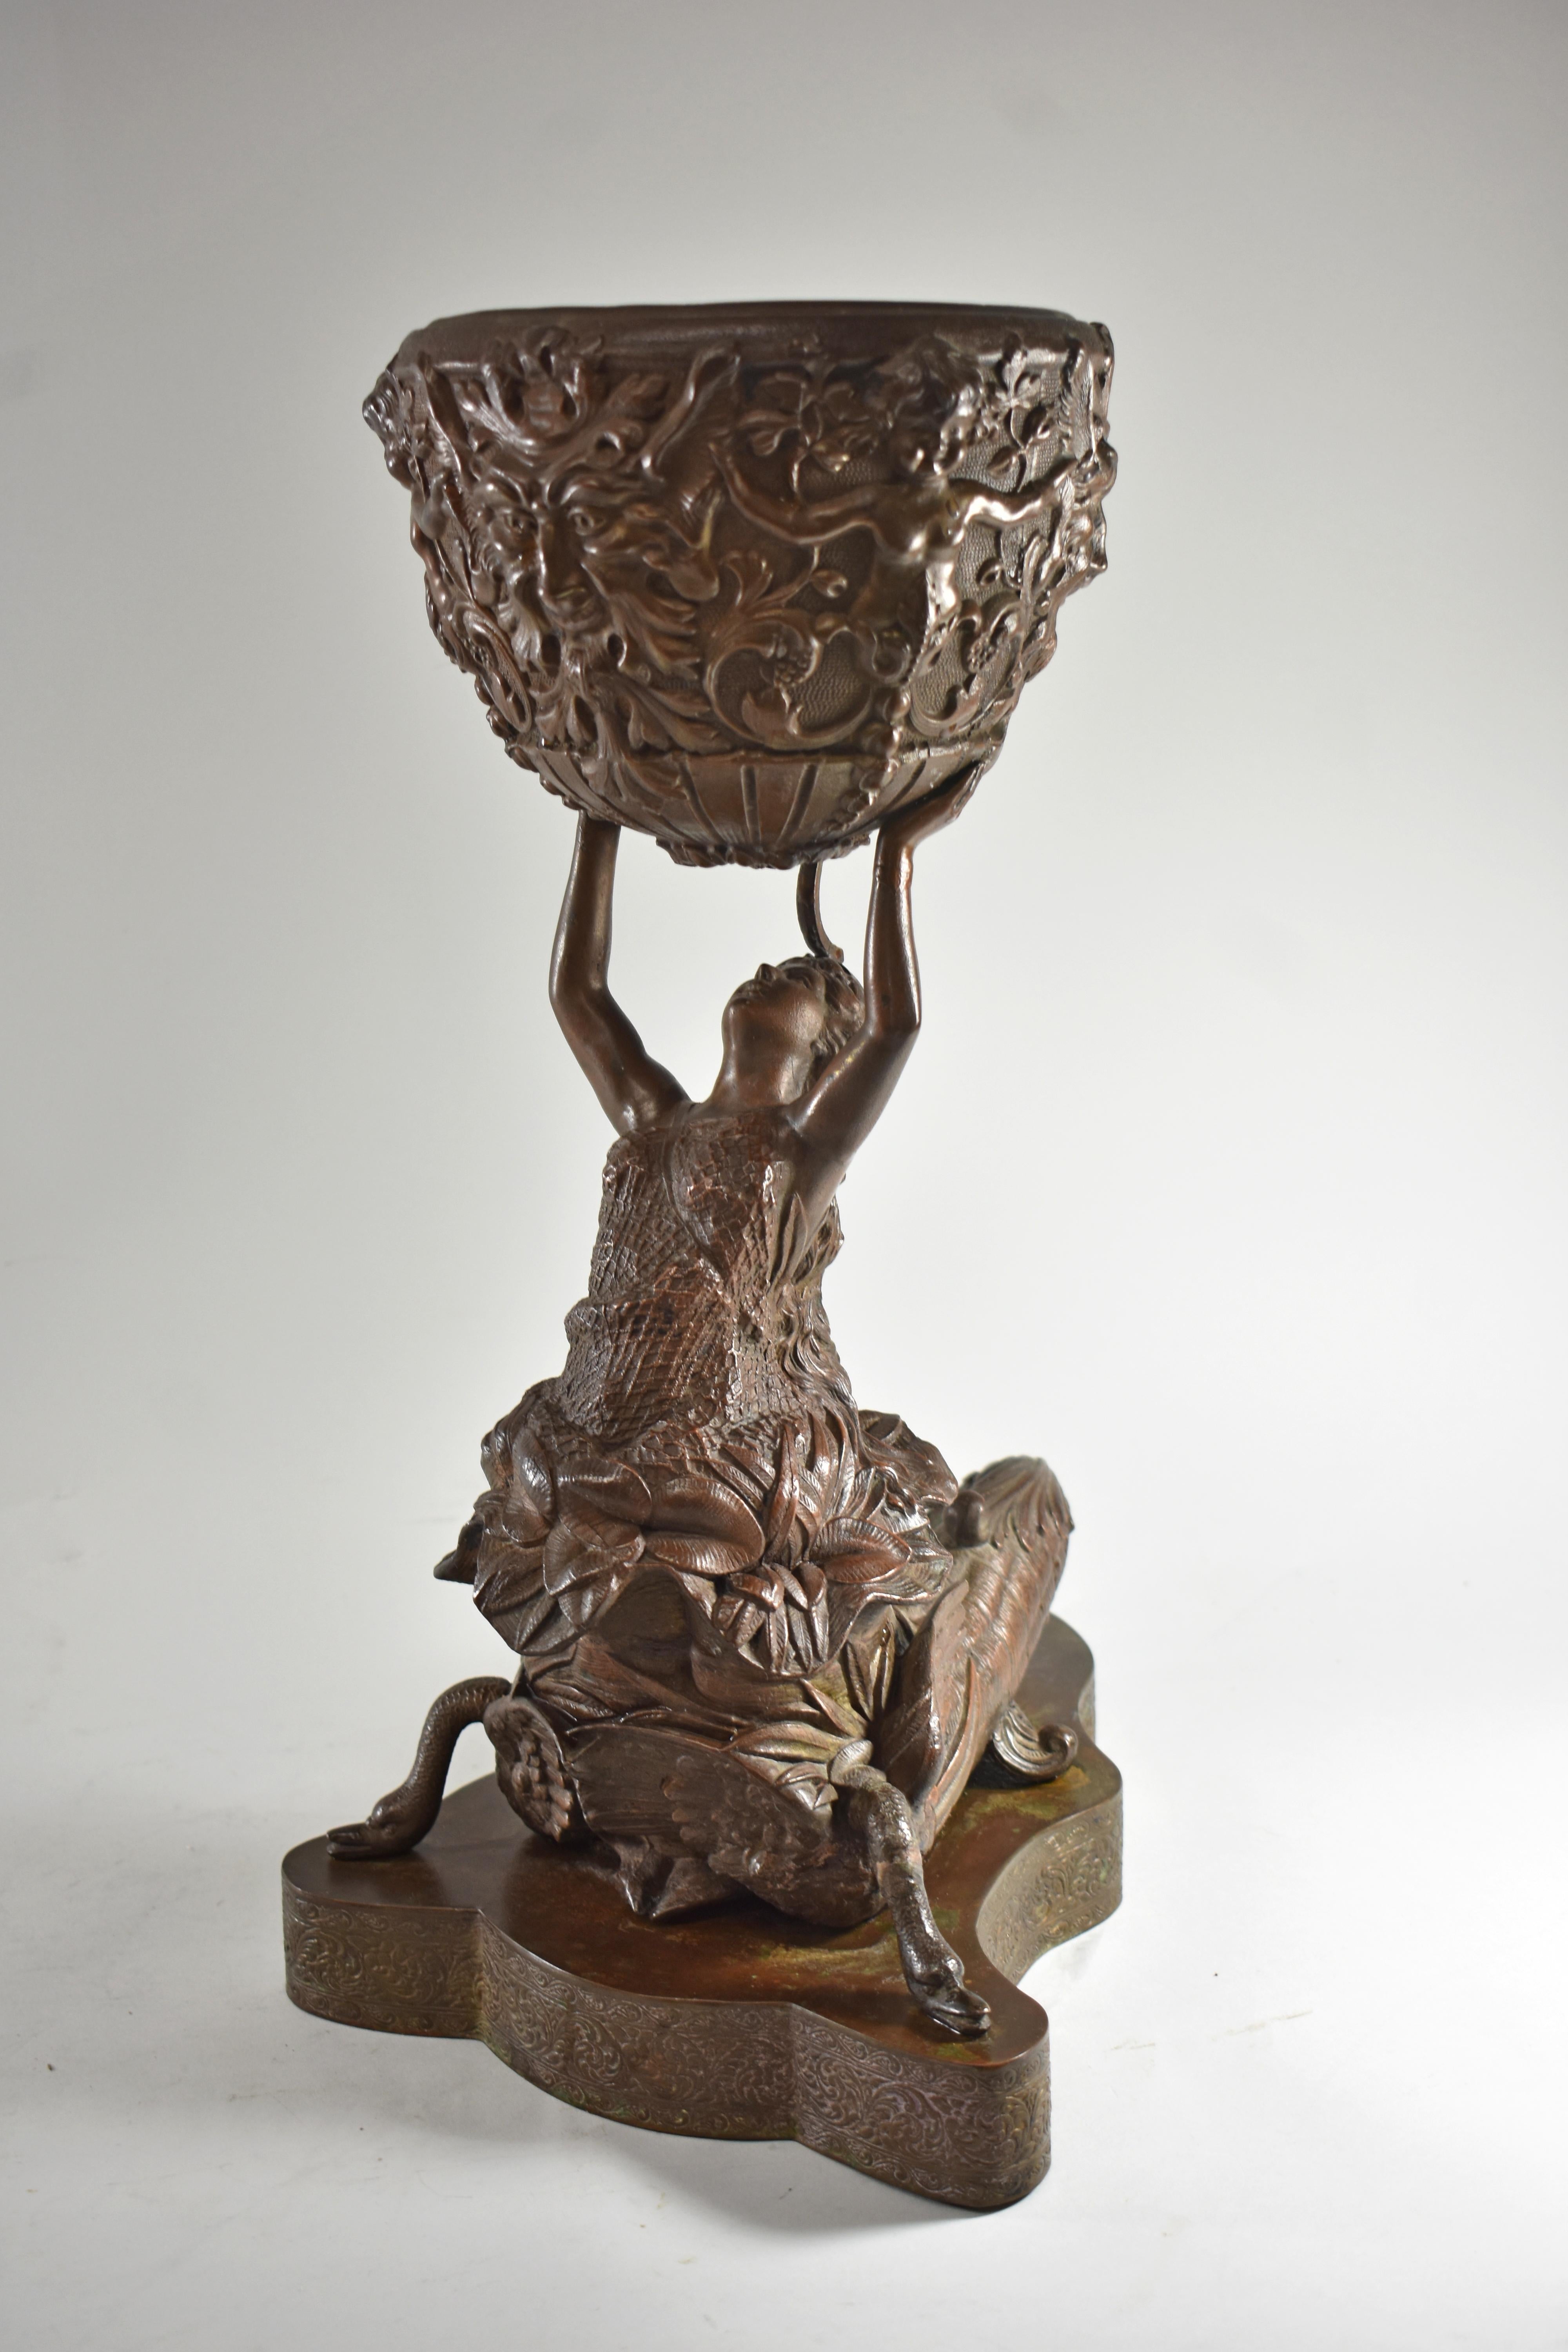 Victorian kerosene oil lamp base by N. Muller's & Sons. Figural mermaid with cornucopia body supported by two swans. She is holding up a bowl with cupid and Bacchus reliefs. Stamped N. Muller's & Sons New York.